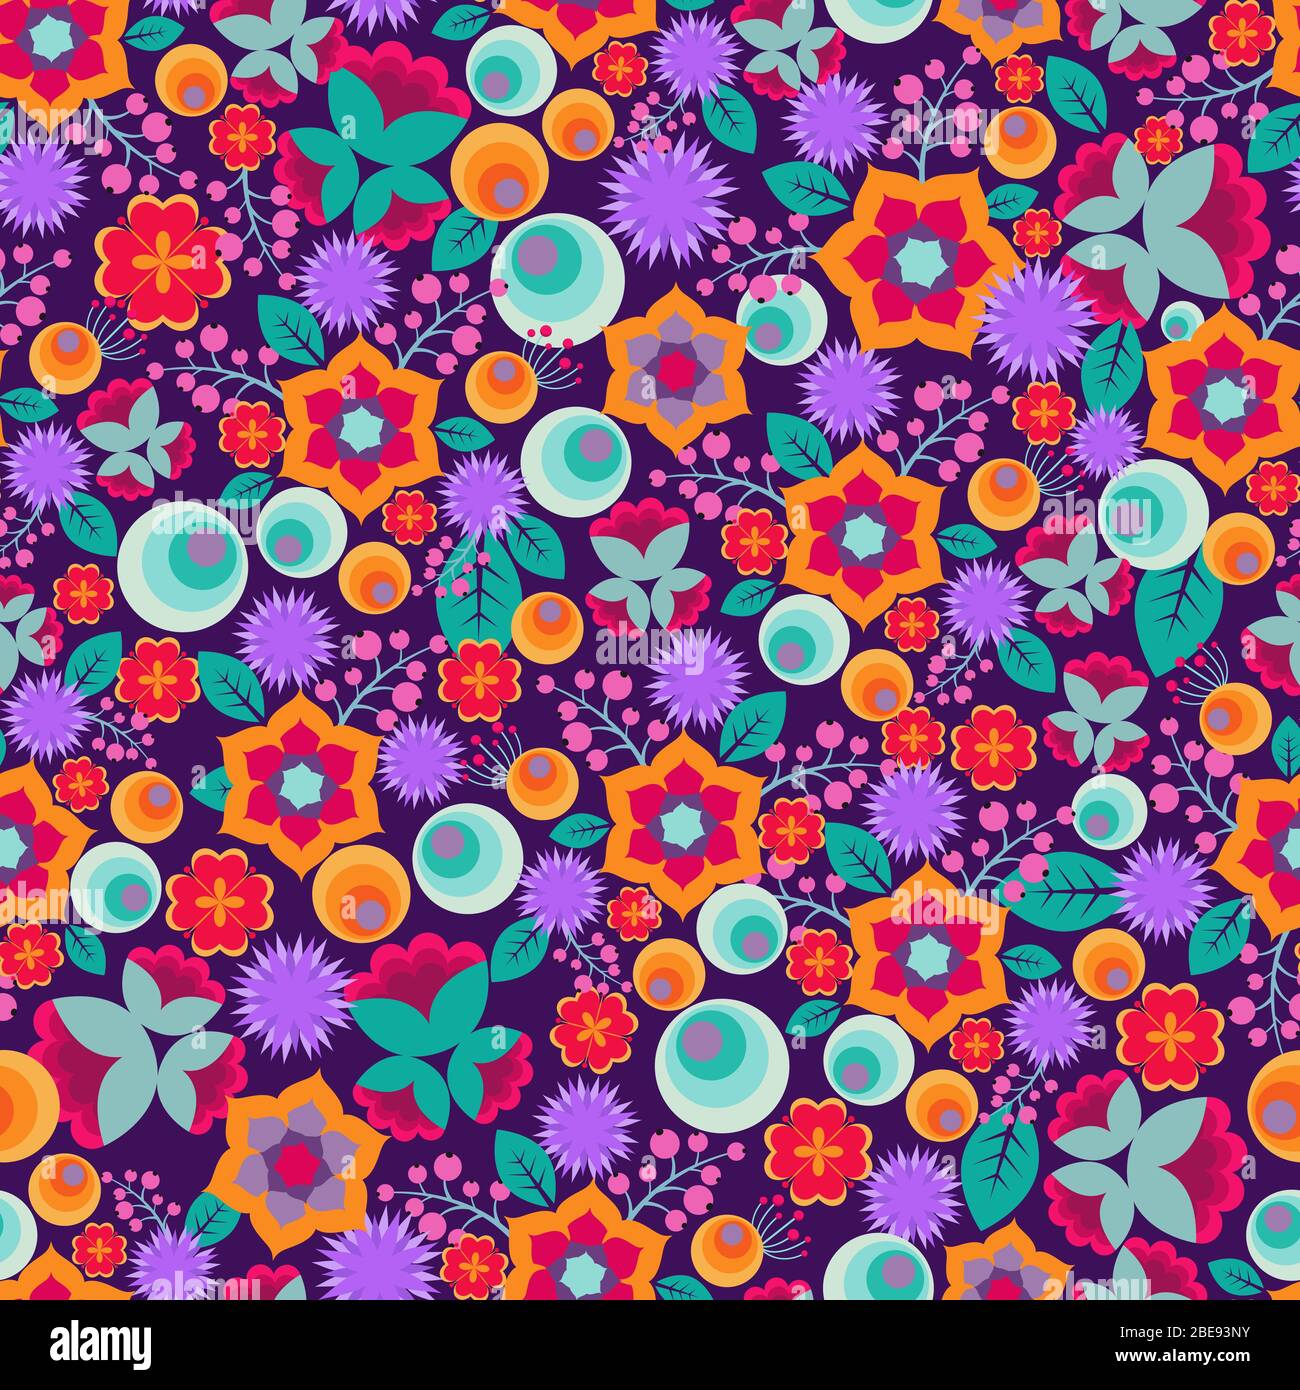 Summery Hippie Background with Abstract Colorful Flowers